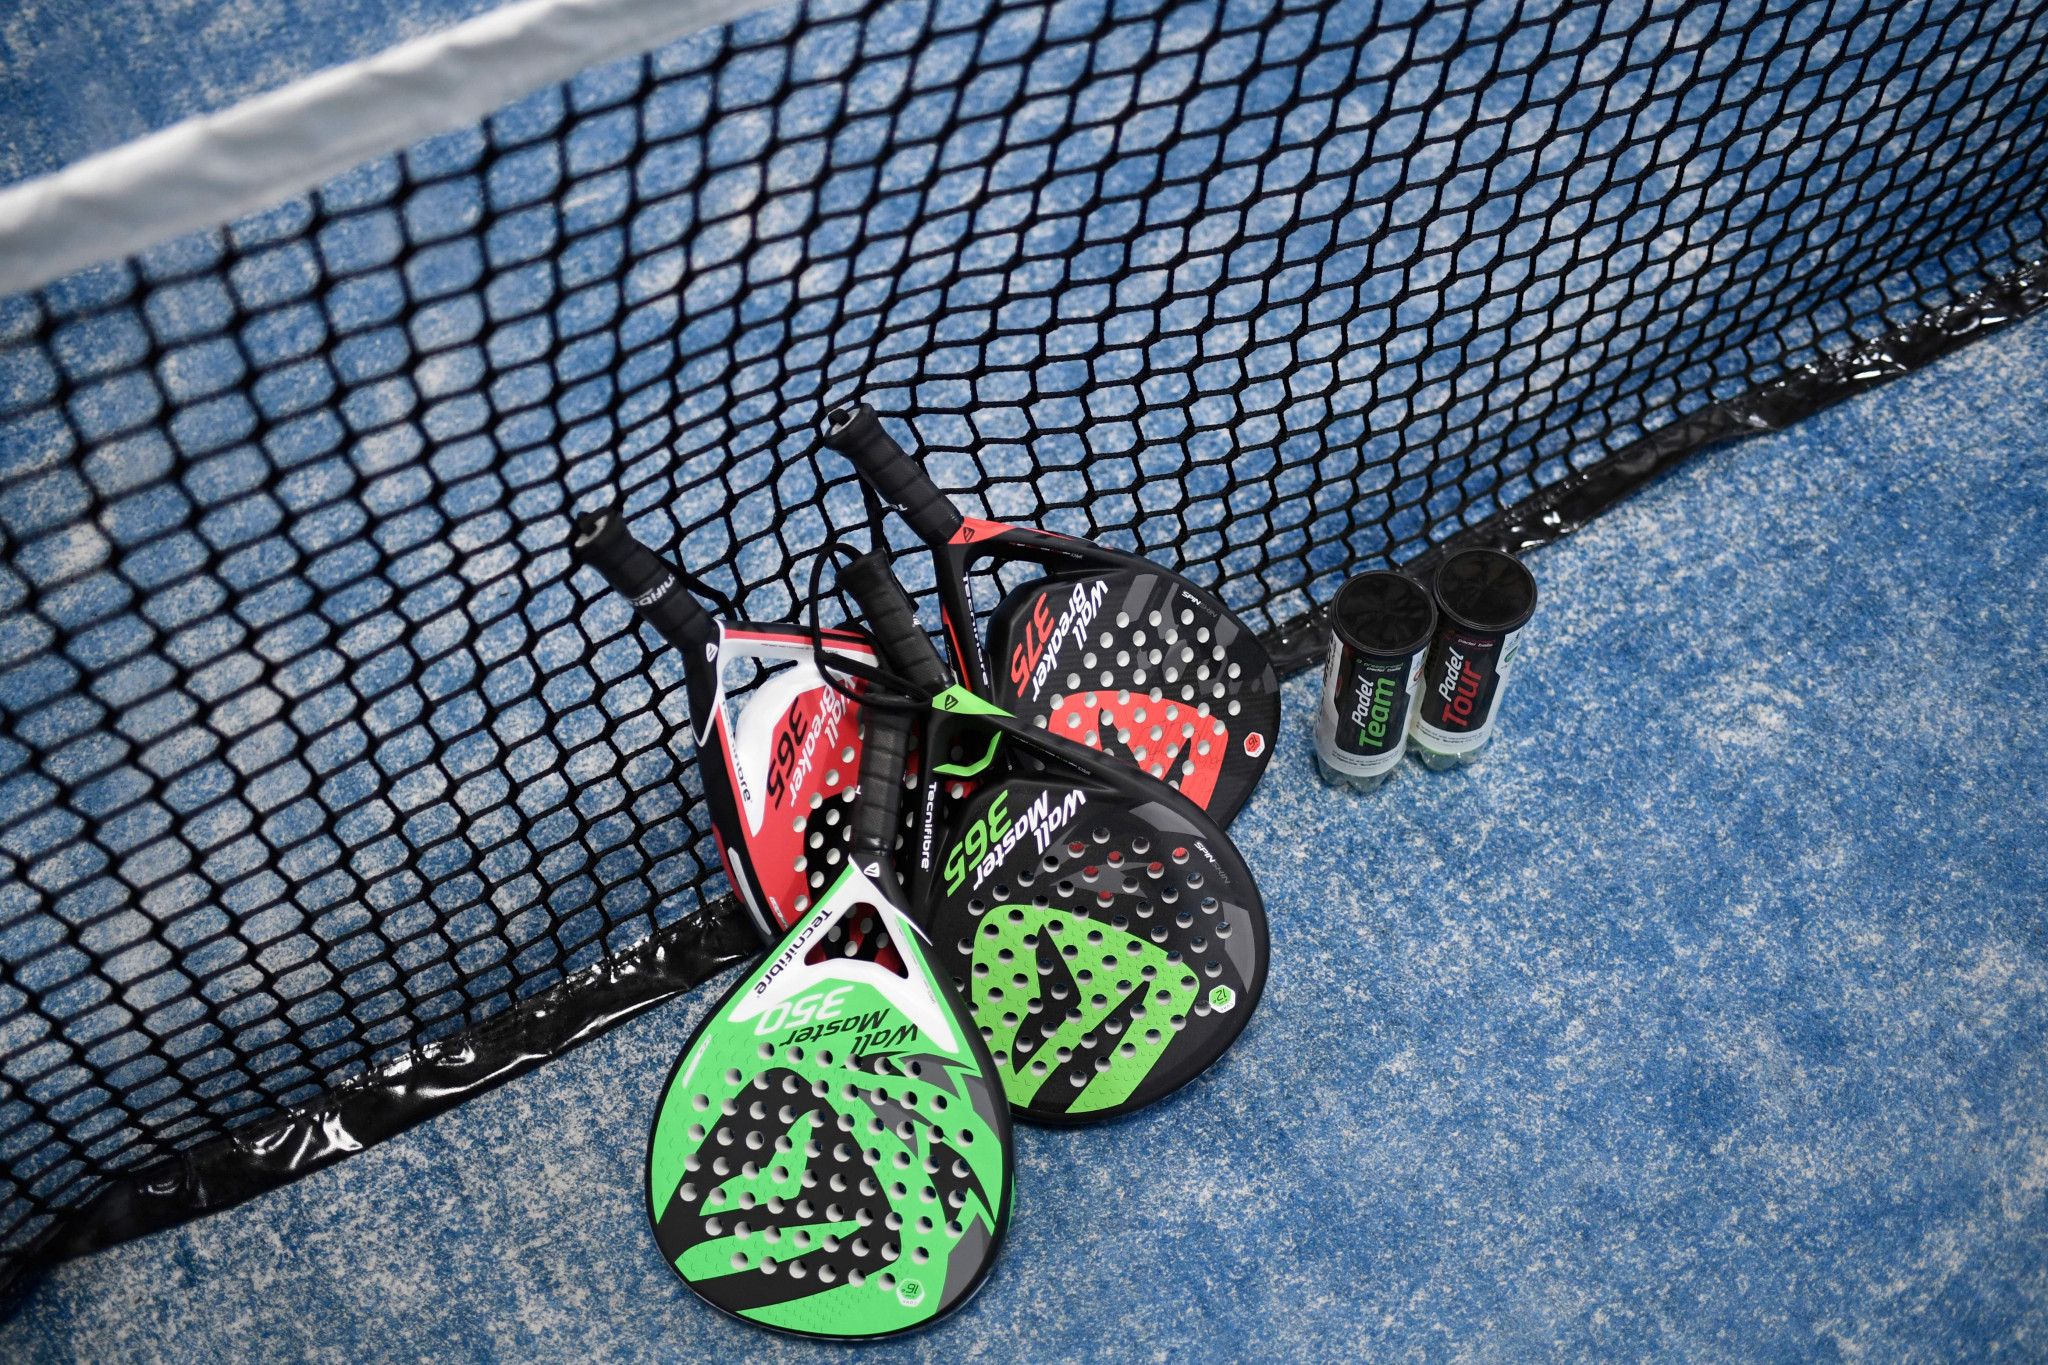 Spain beat Argentina in the men's and women's finals at the World Padel Championships ©Getty Images